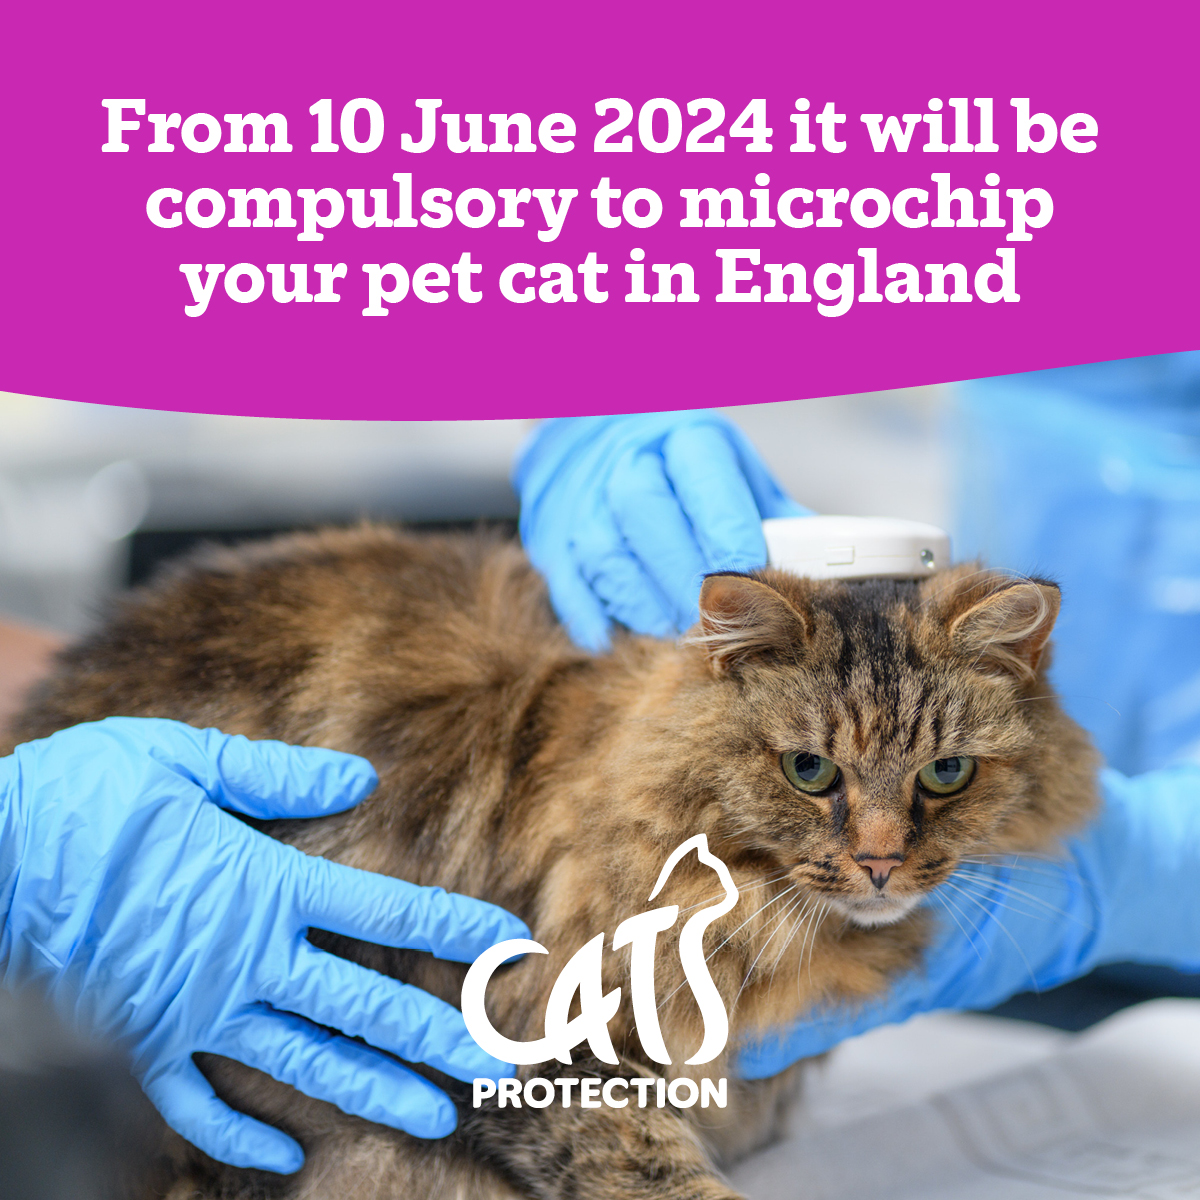 50 days until the microchipping of pet cats becomes law in England. Tag a fellow cat lover to ensure their cat has the best chance of being reunited if they ever get lost. Learn more about microchips and the law coming into force here: spr.ly/Microchipping